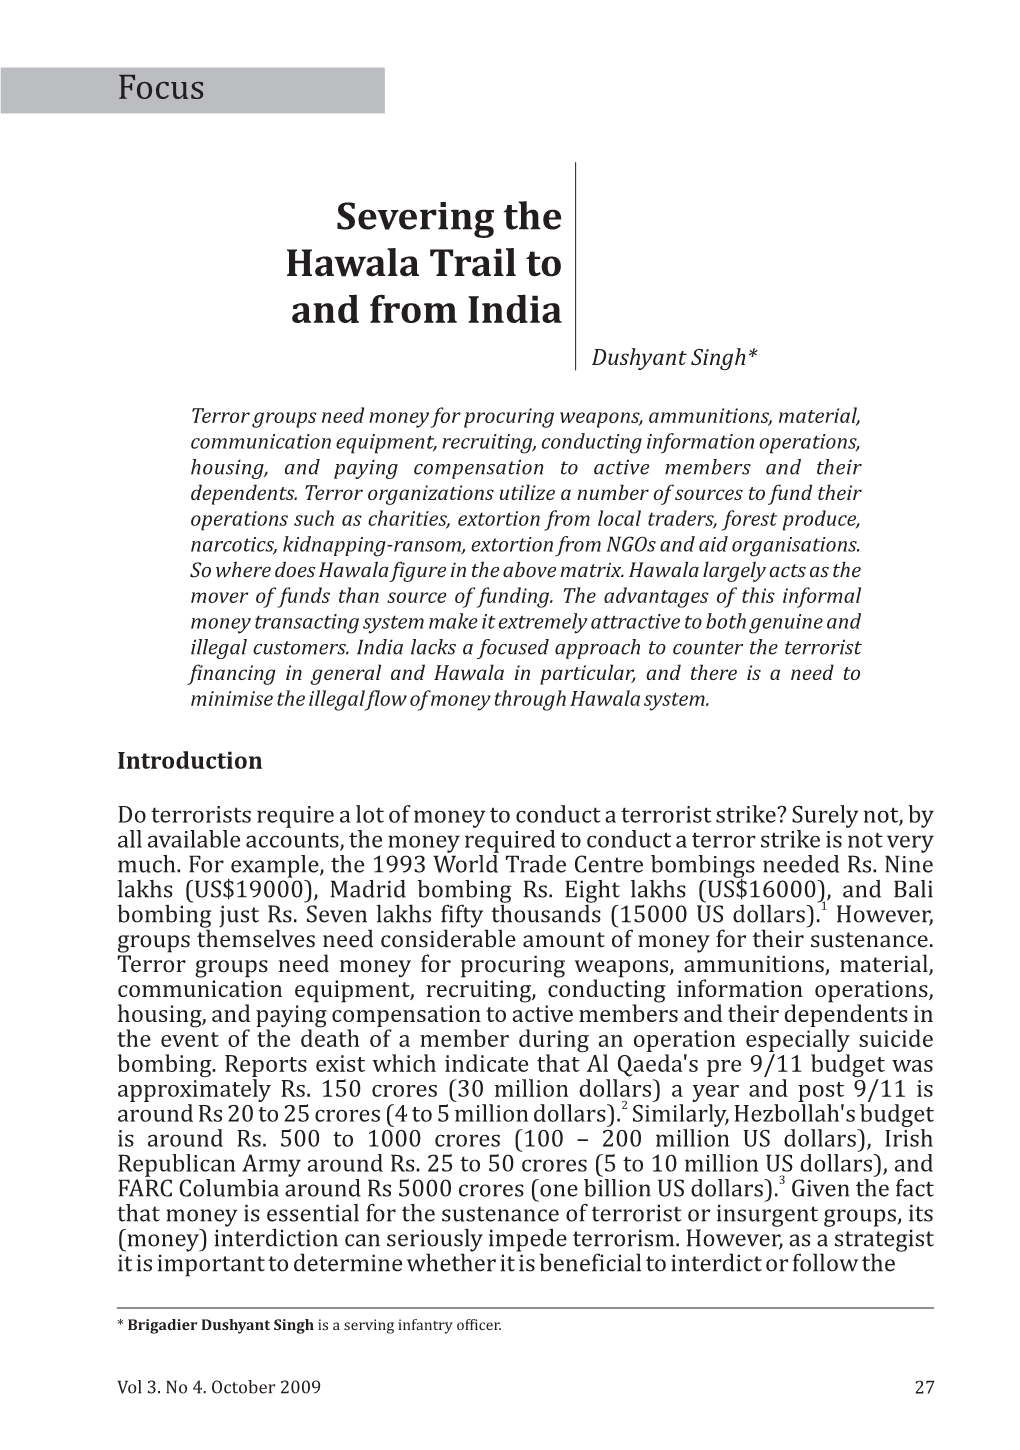 Severing the Hawala Trail to and from India Dushyant Singh*